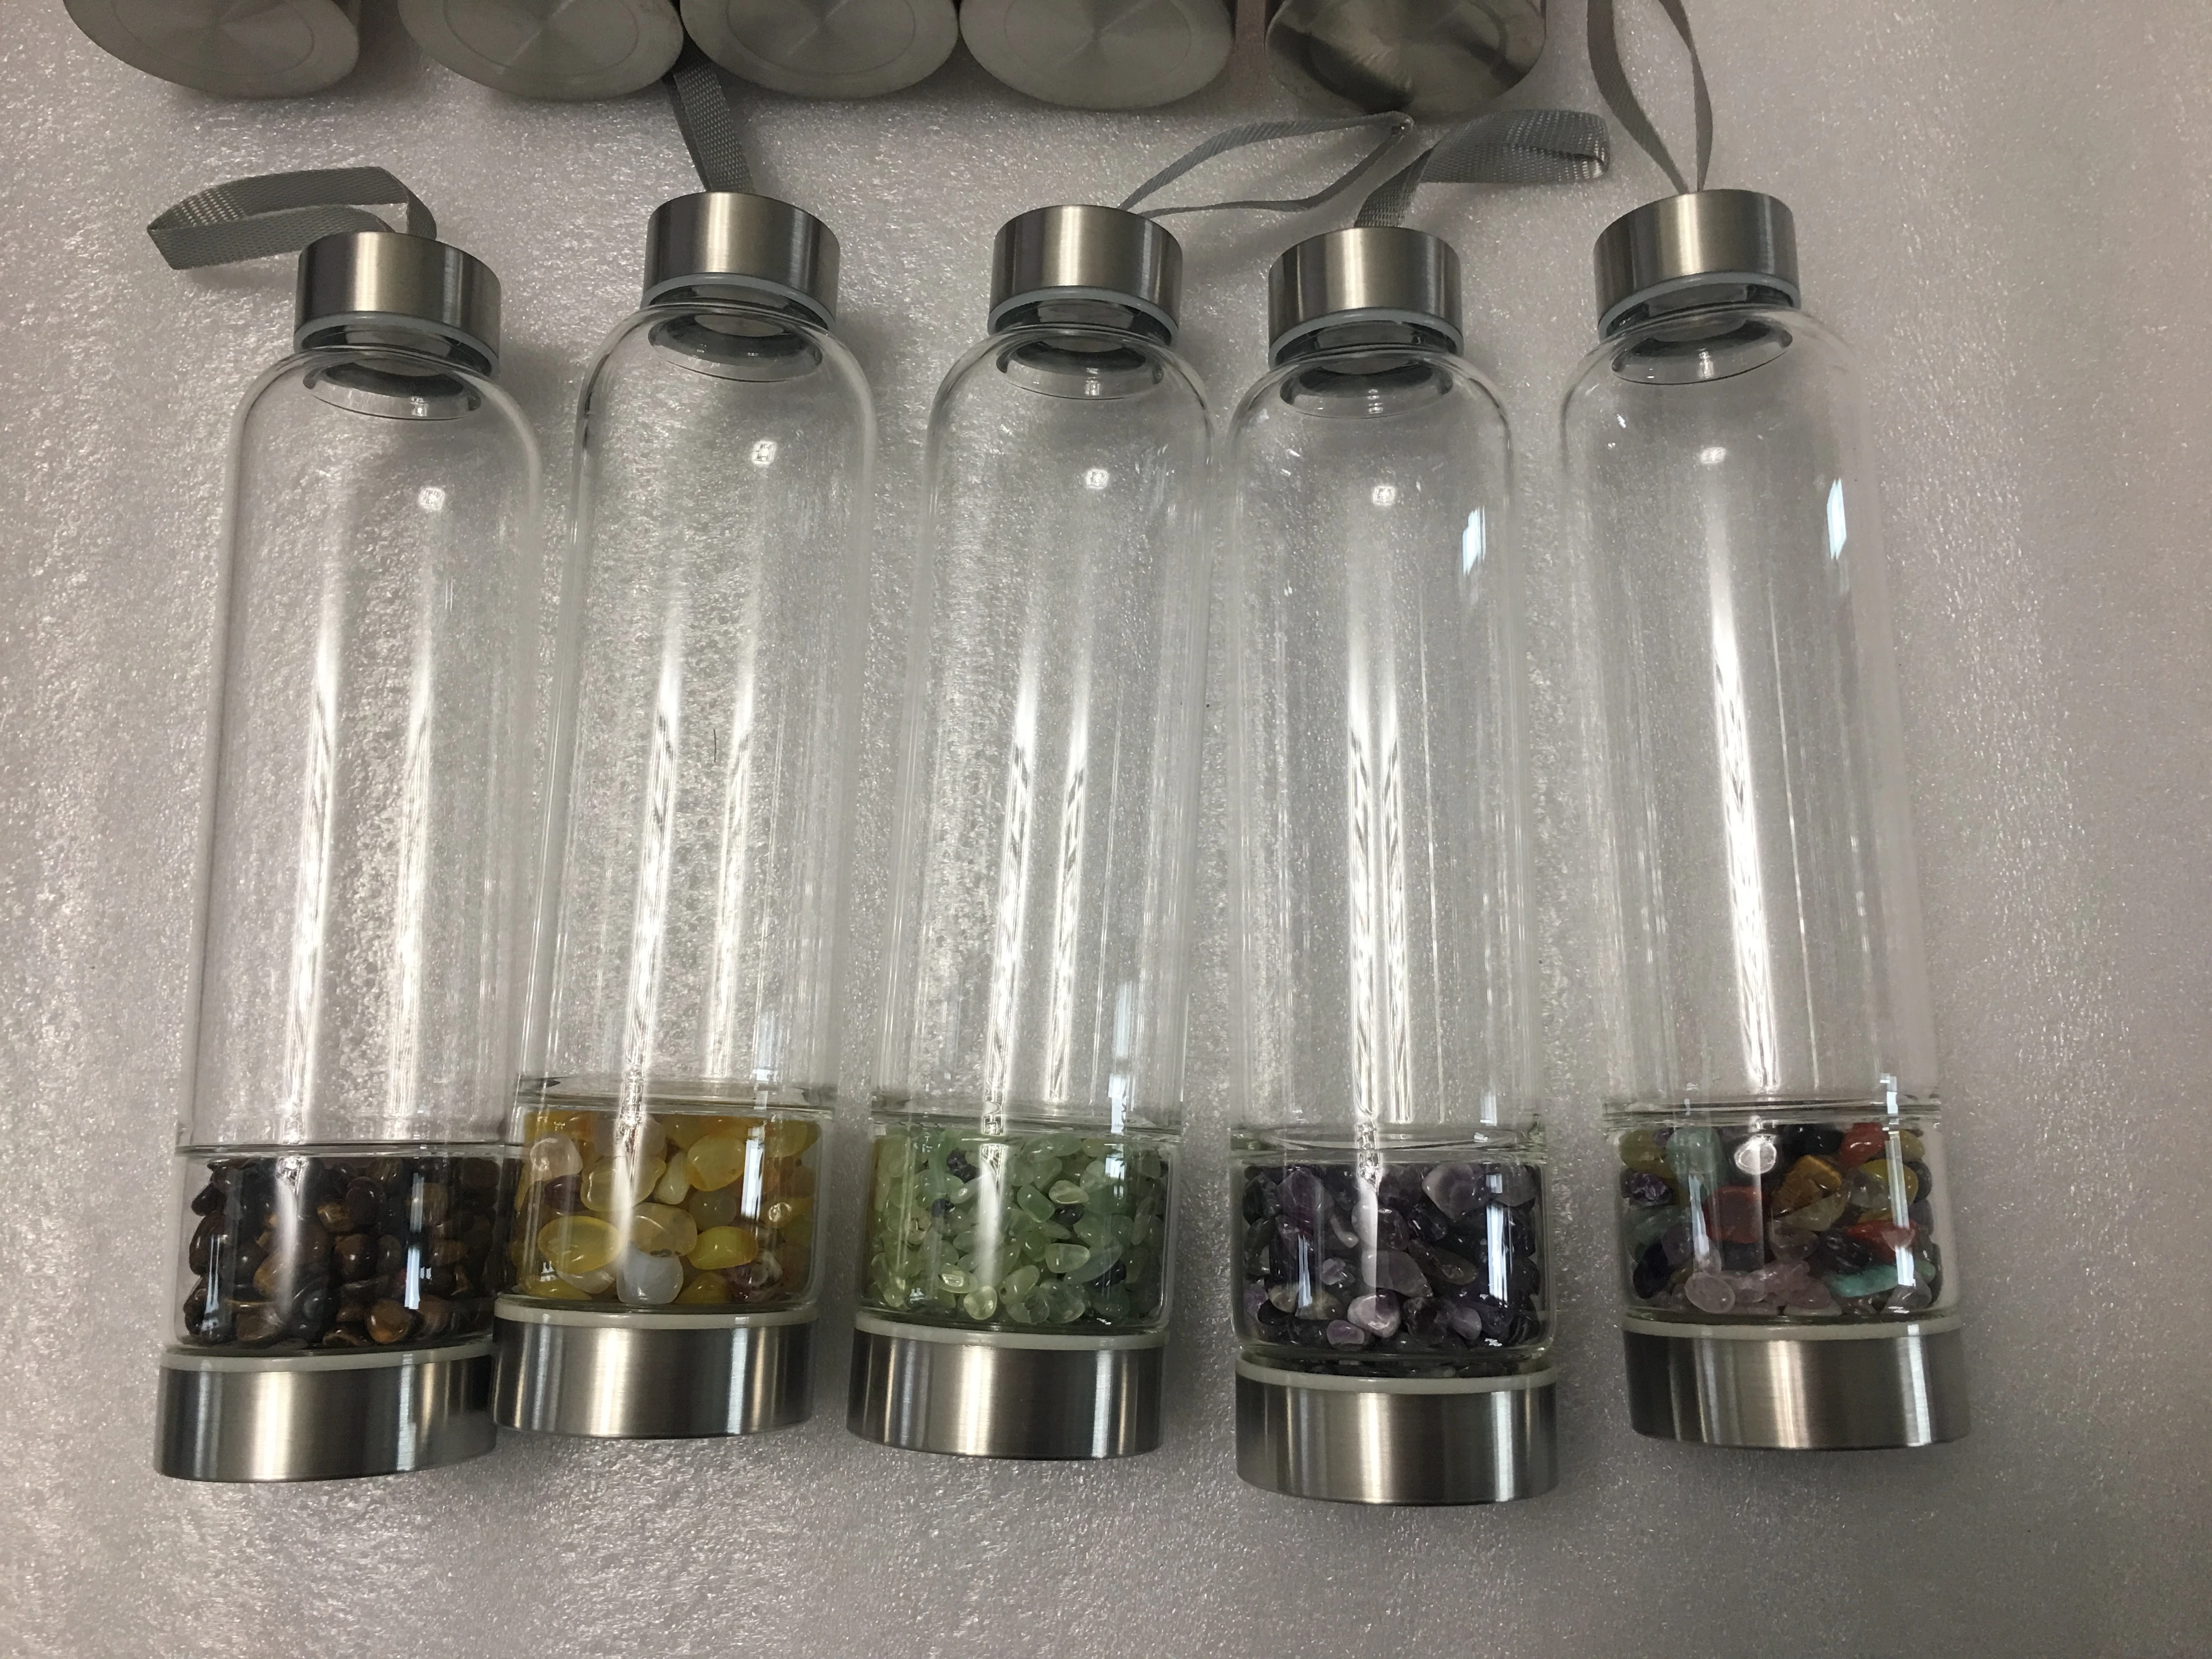 popular unique gifts high quality indoor and outdoor use drinking water infused healing stone glass crystal quartz bottle